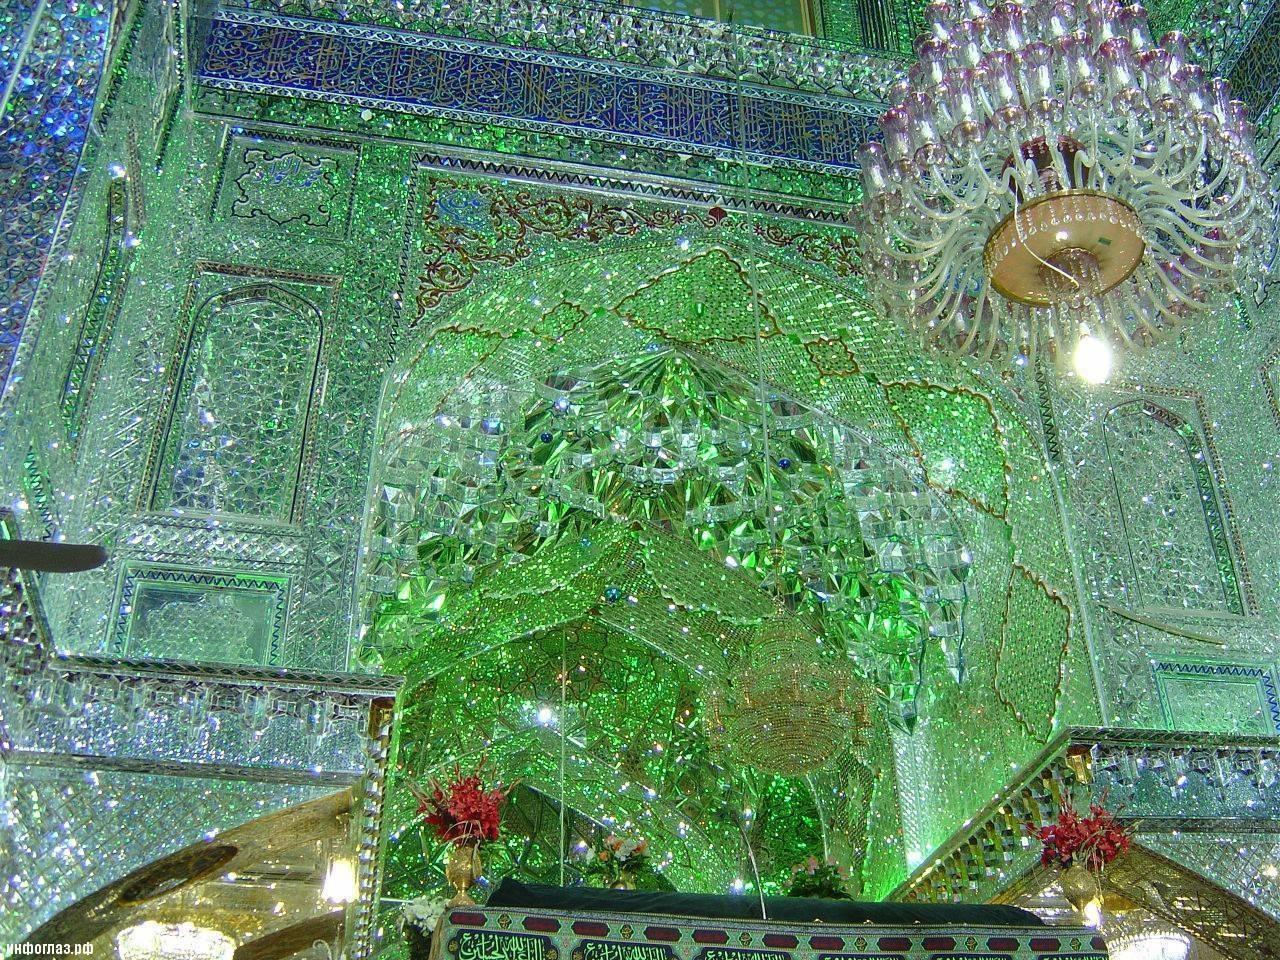 Glimmers of green at a mosque in Iran.